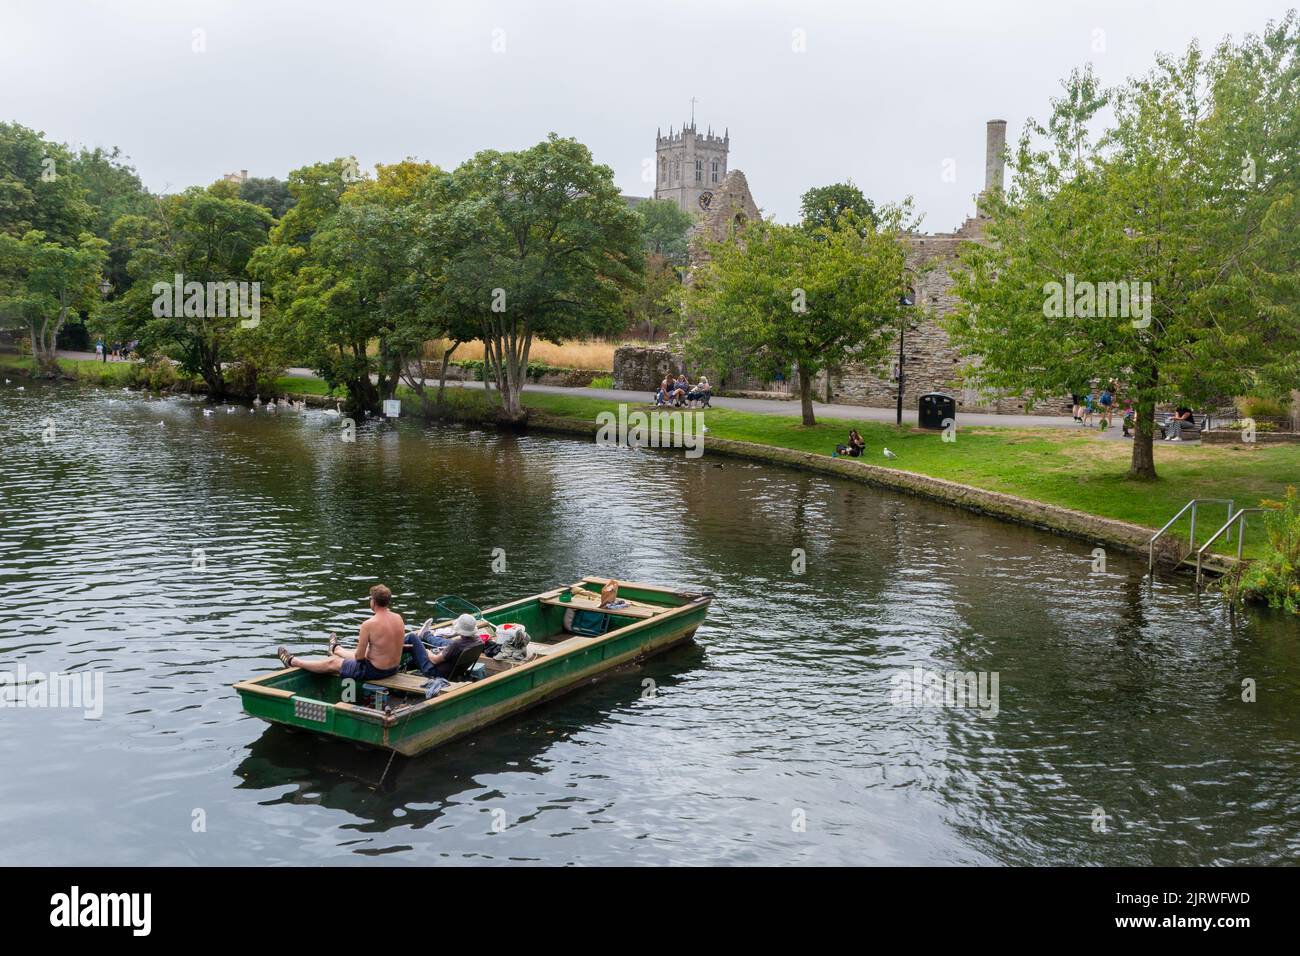 Two men fishing from a boat on the River Avon close to Christchurch Priory and the Norman House, a ruined castle keep, Christchurch Dorset, England UK Stock Photo